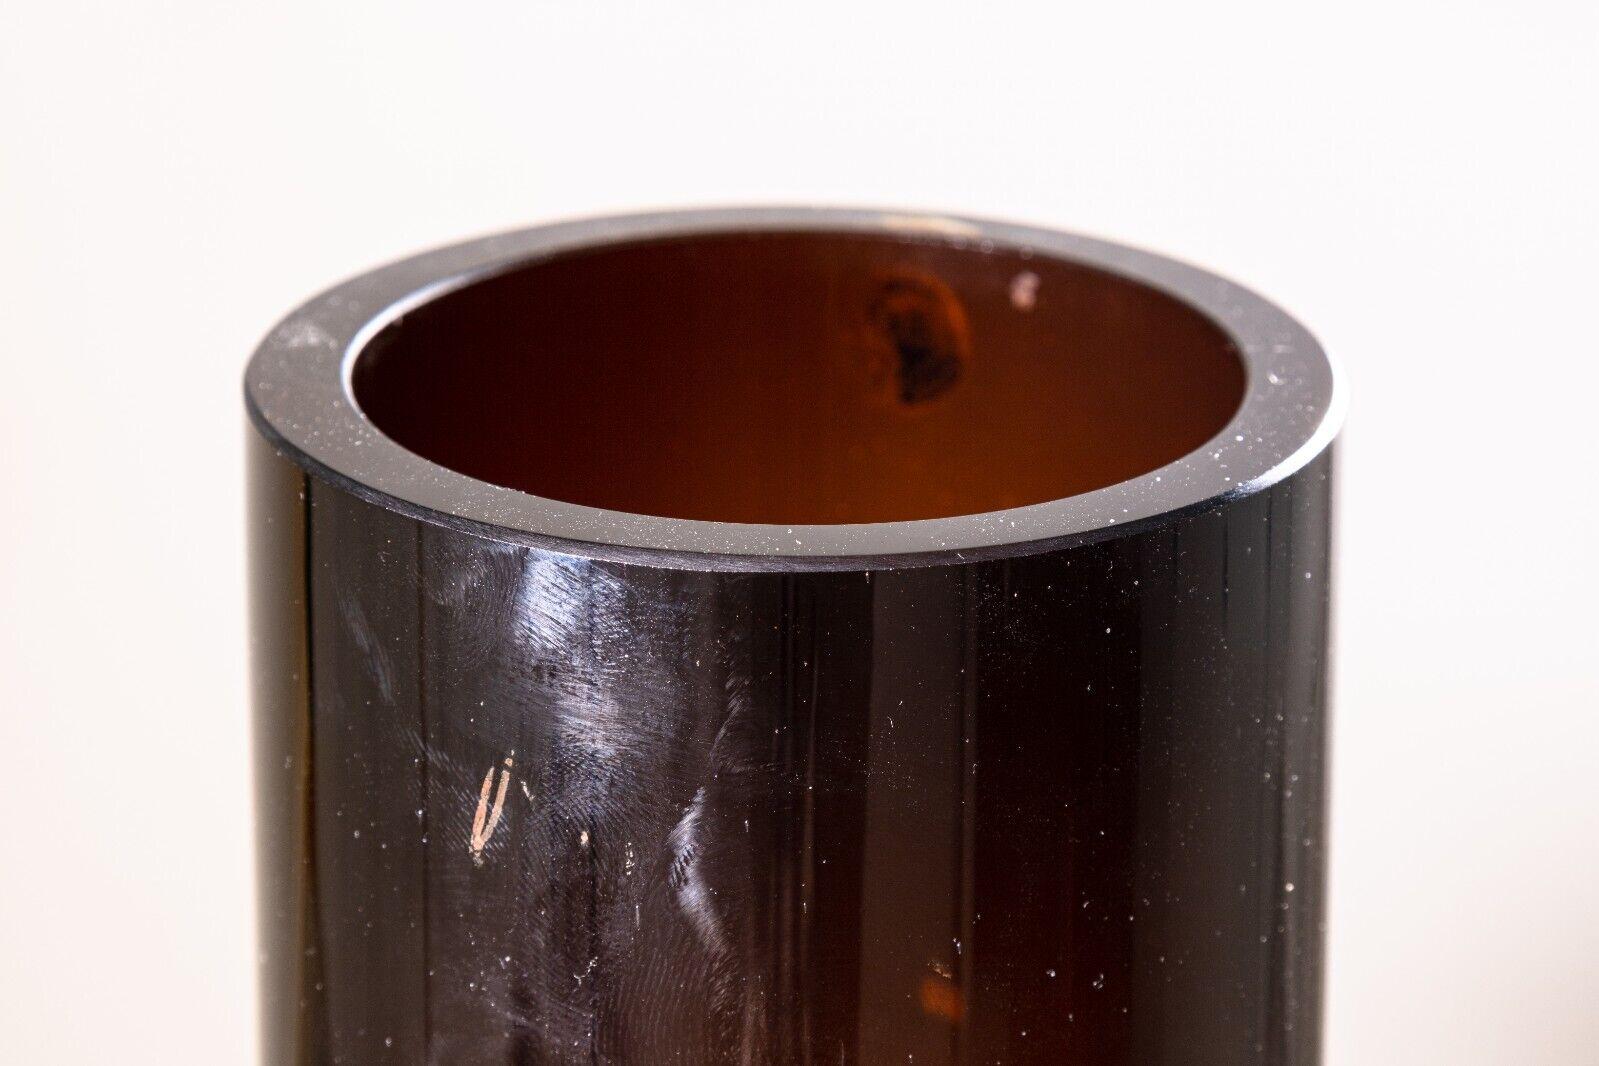 A Tamara Aladin for Riihimaki Lasi Finnish brown glass vessel. A stunning piece of mid century modern art glass with Finnish origins. This piece features a radiant brown coloring, and a ribbed cylinder design. It is in very good condition and